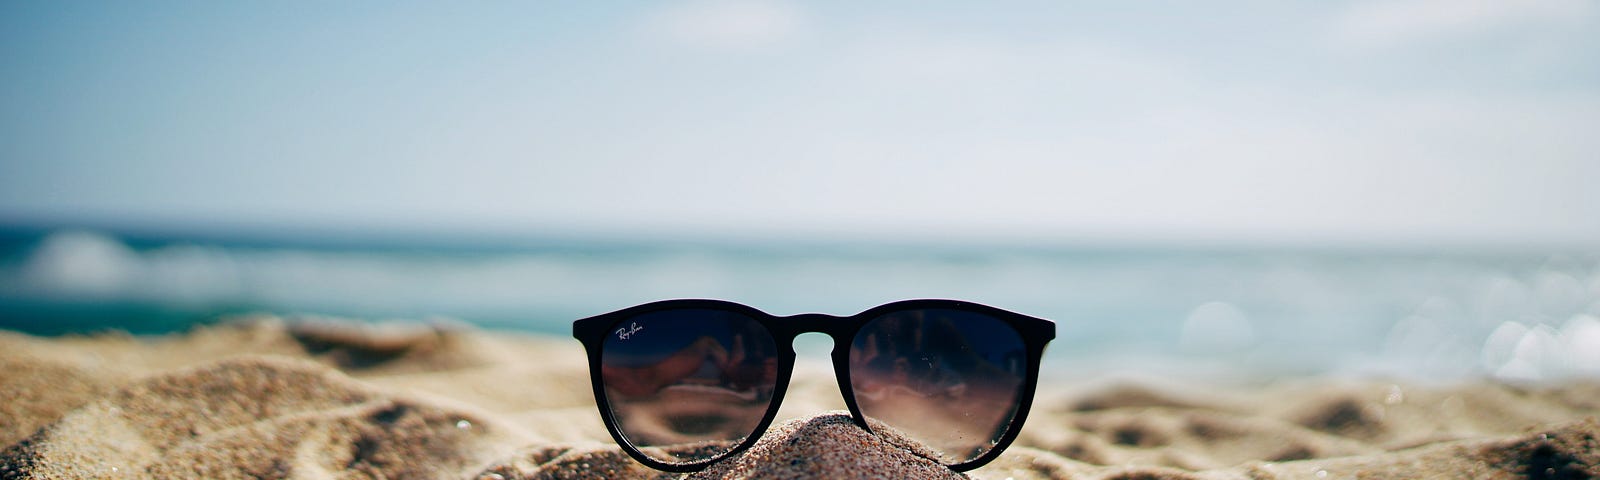 Image of sunglasses sitting on a sandy beach with the water out of focus behind it